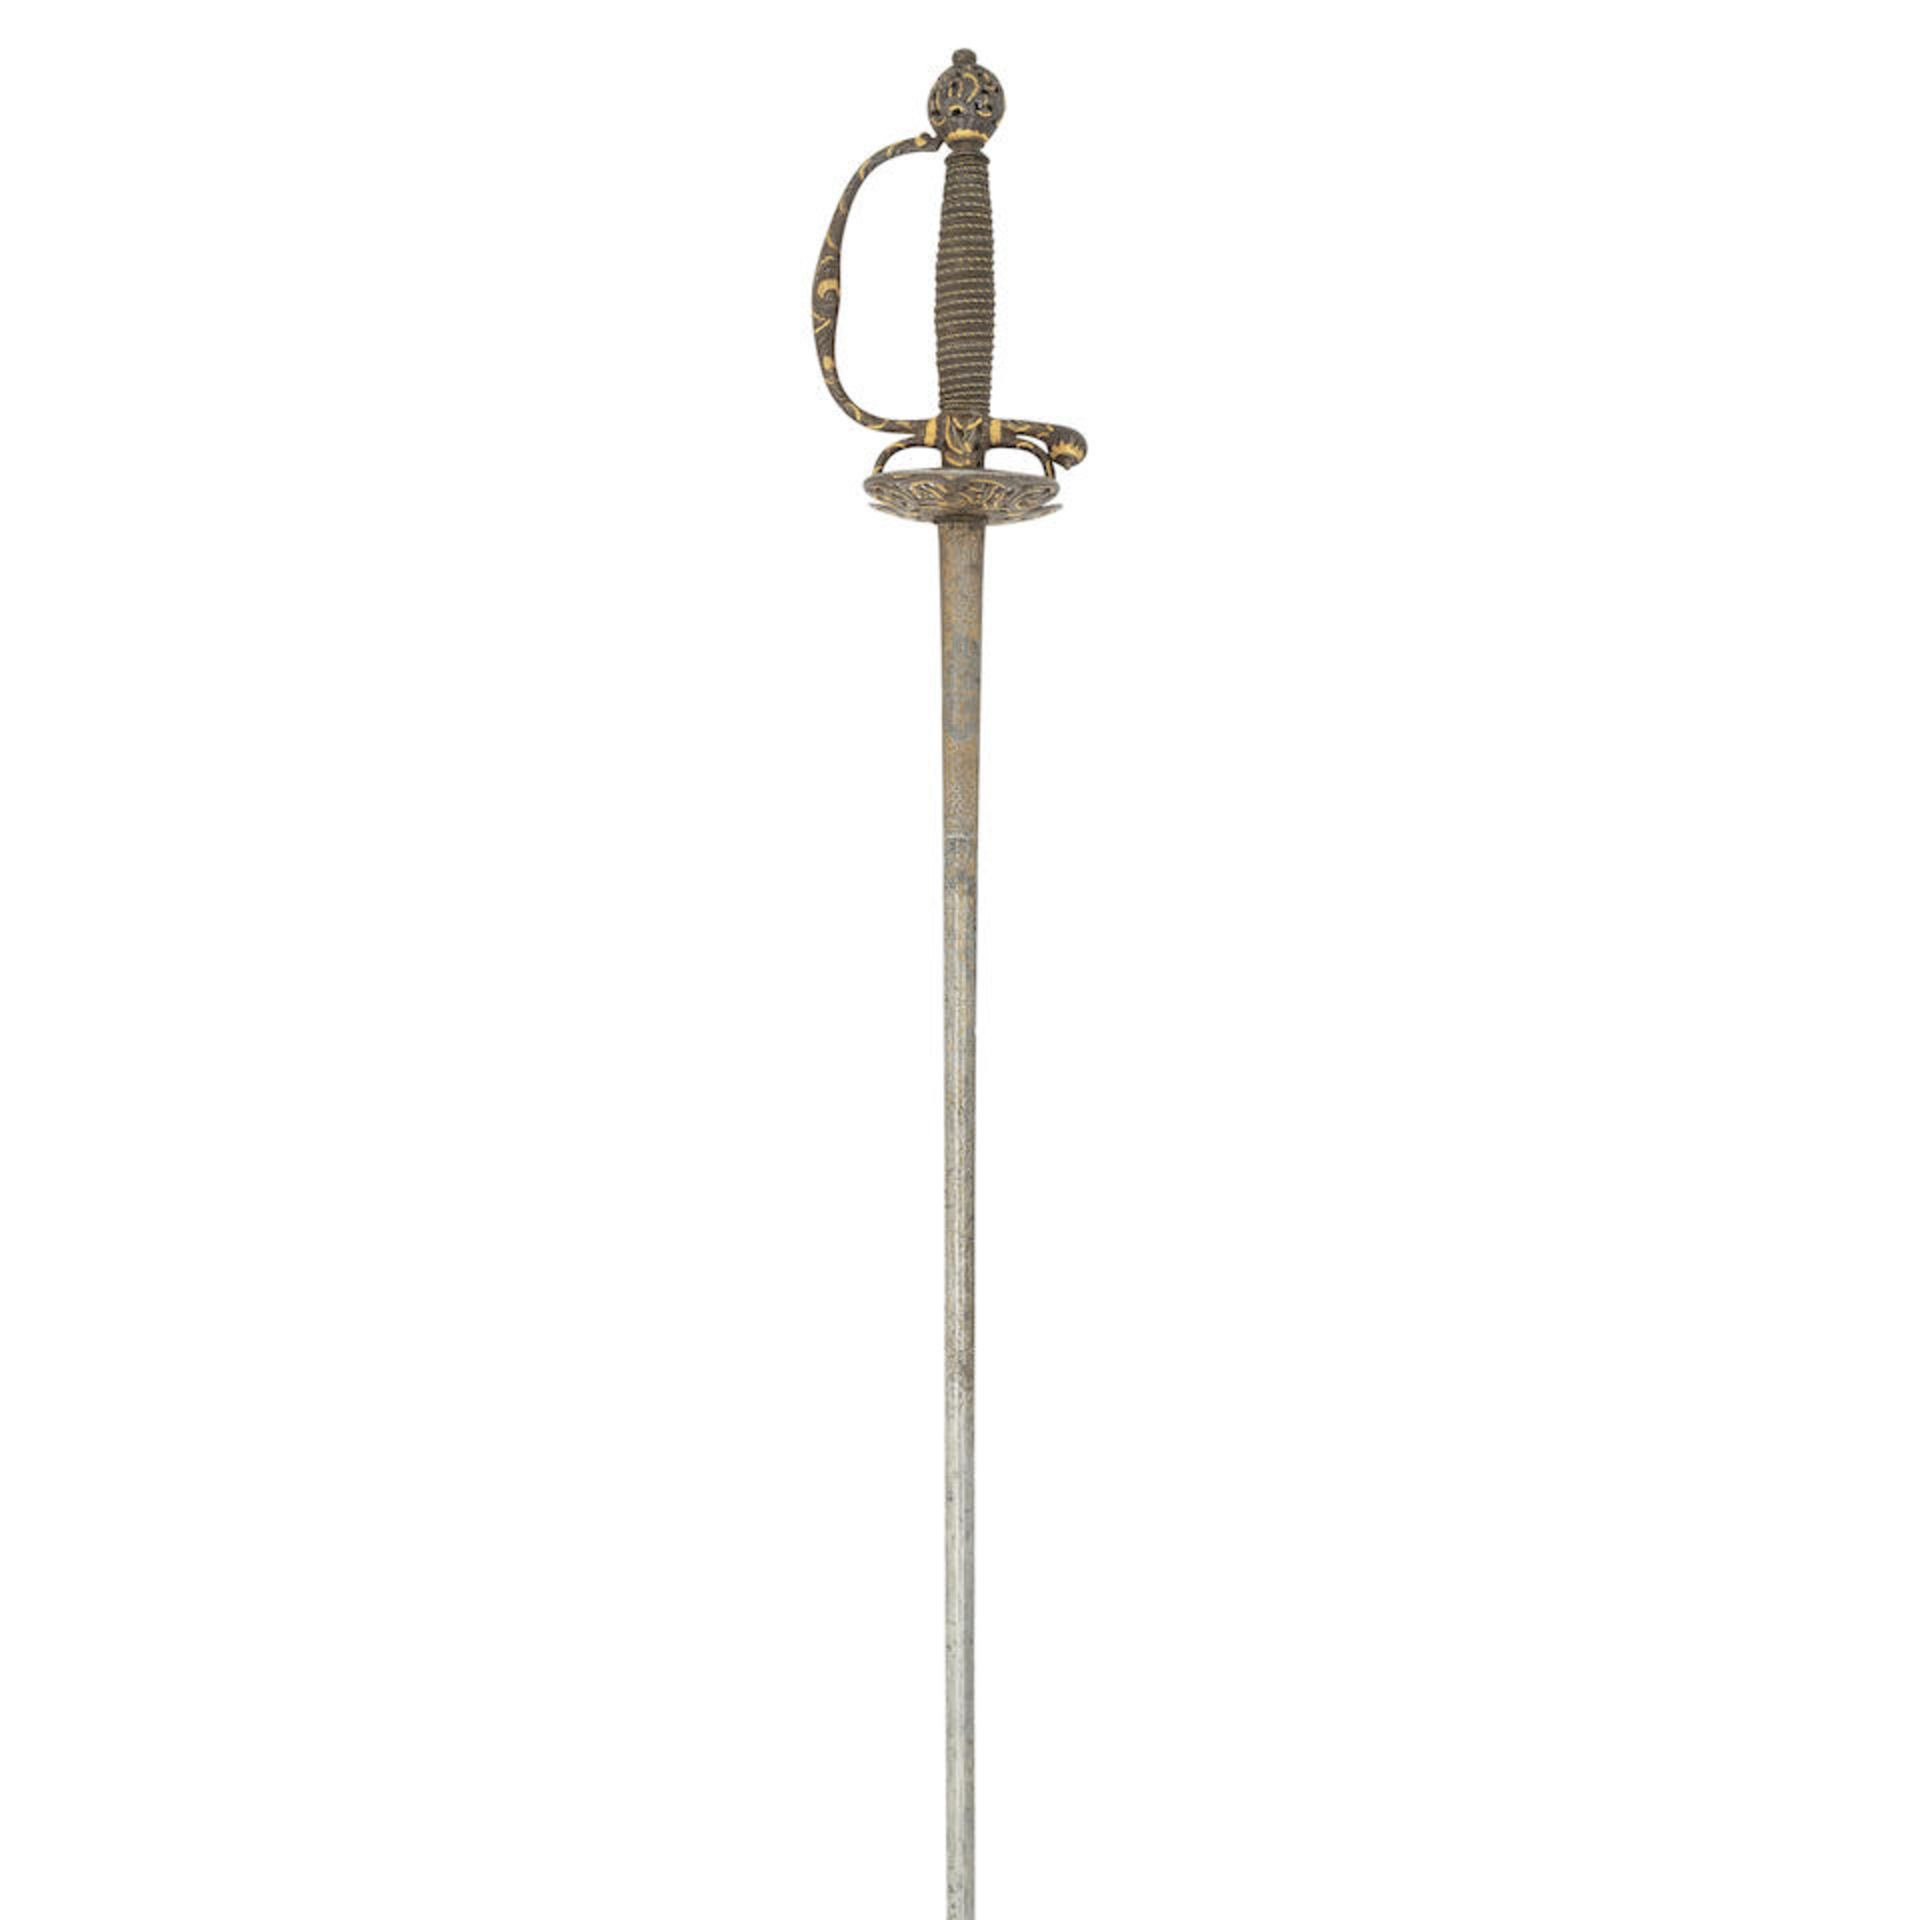 A Continental Small-Sword With Chiselled And Gilt Hilt